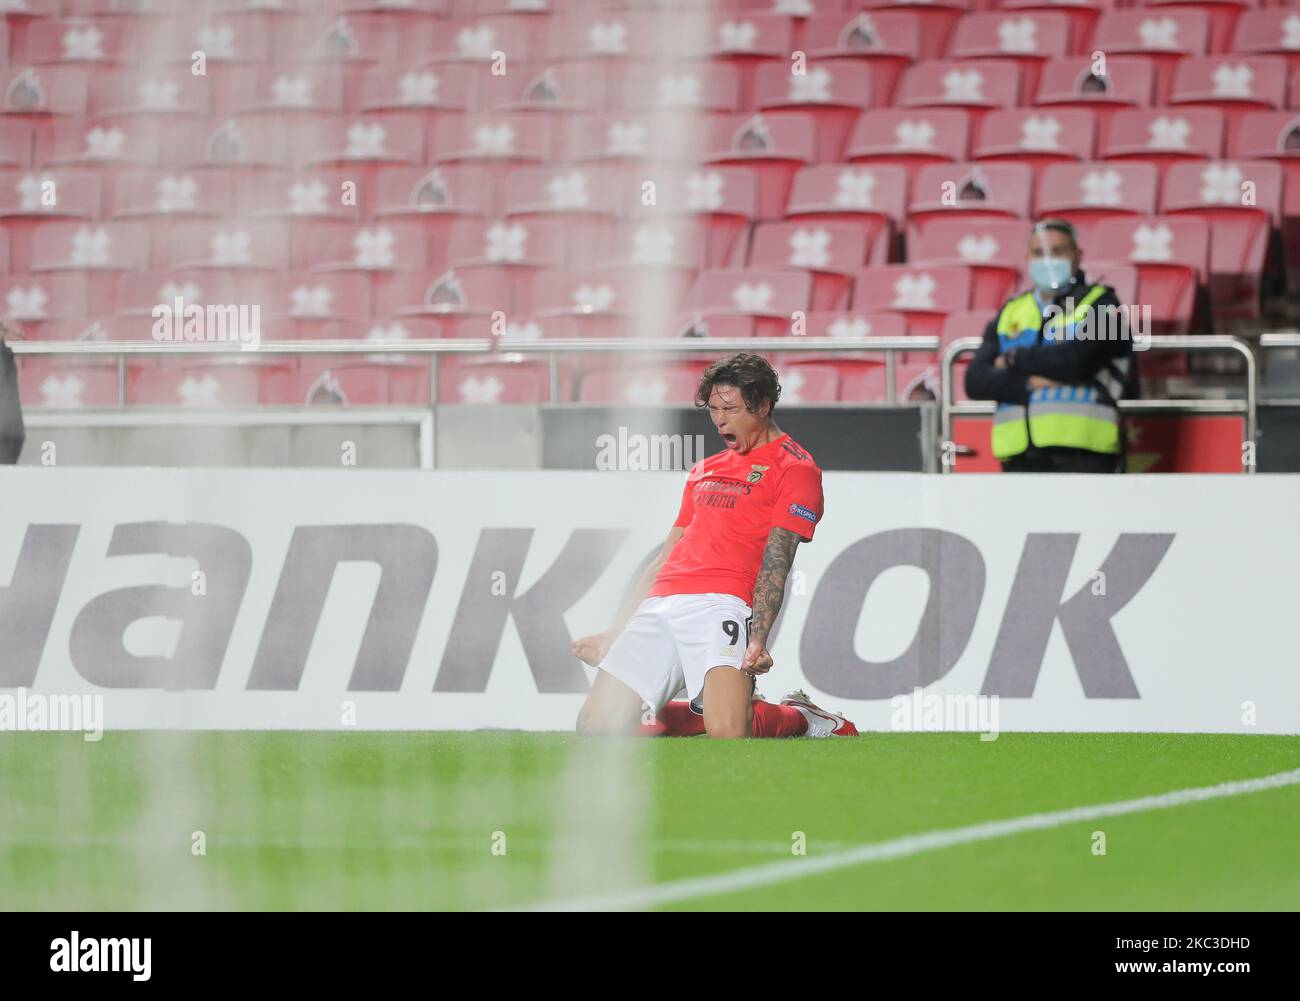 Darwin Nunez Luis of SL Benfica celebrates after scoring a goal during the UEFA Europa League Group D stage match between SL Benfica and Rangers FC at Estadio da Luz on November 5, 2020 in Lisbon, Portugal. (Photo by Paulo Nascimento/NurPhoto) Stock Photo